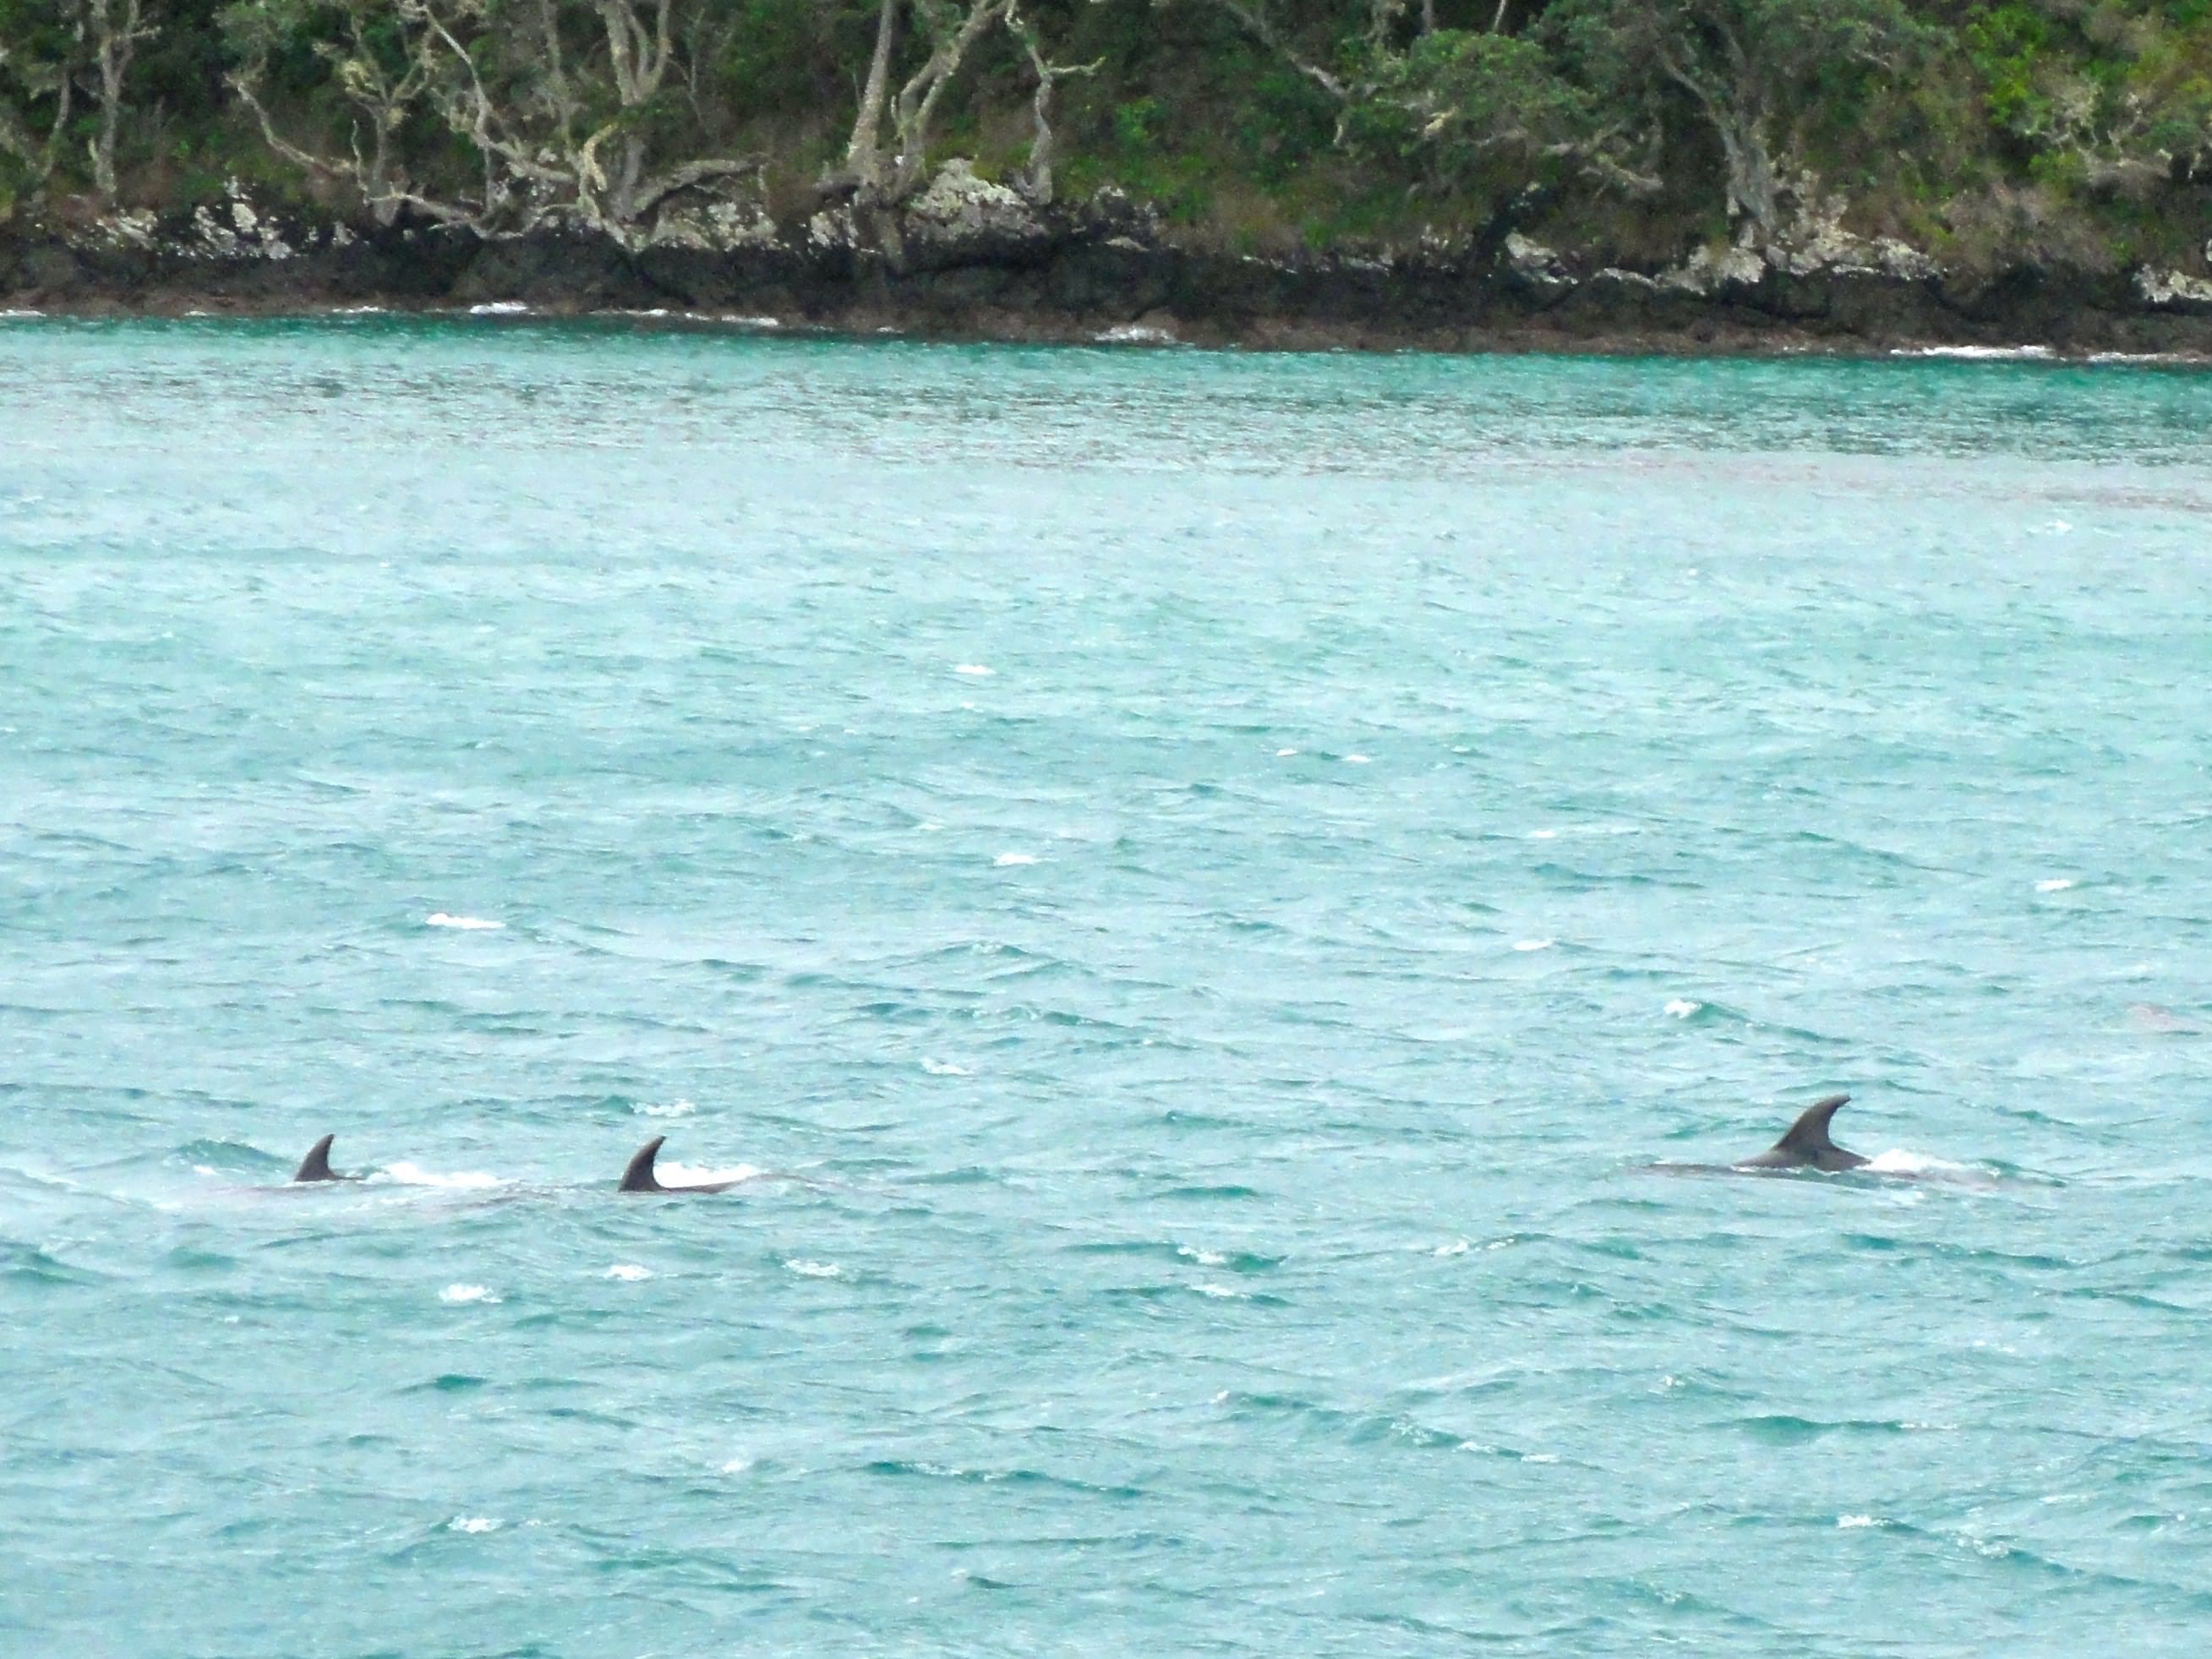 Dolphins in the Bay of Islands